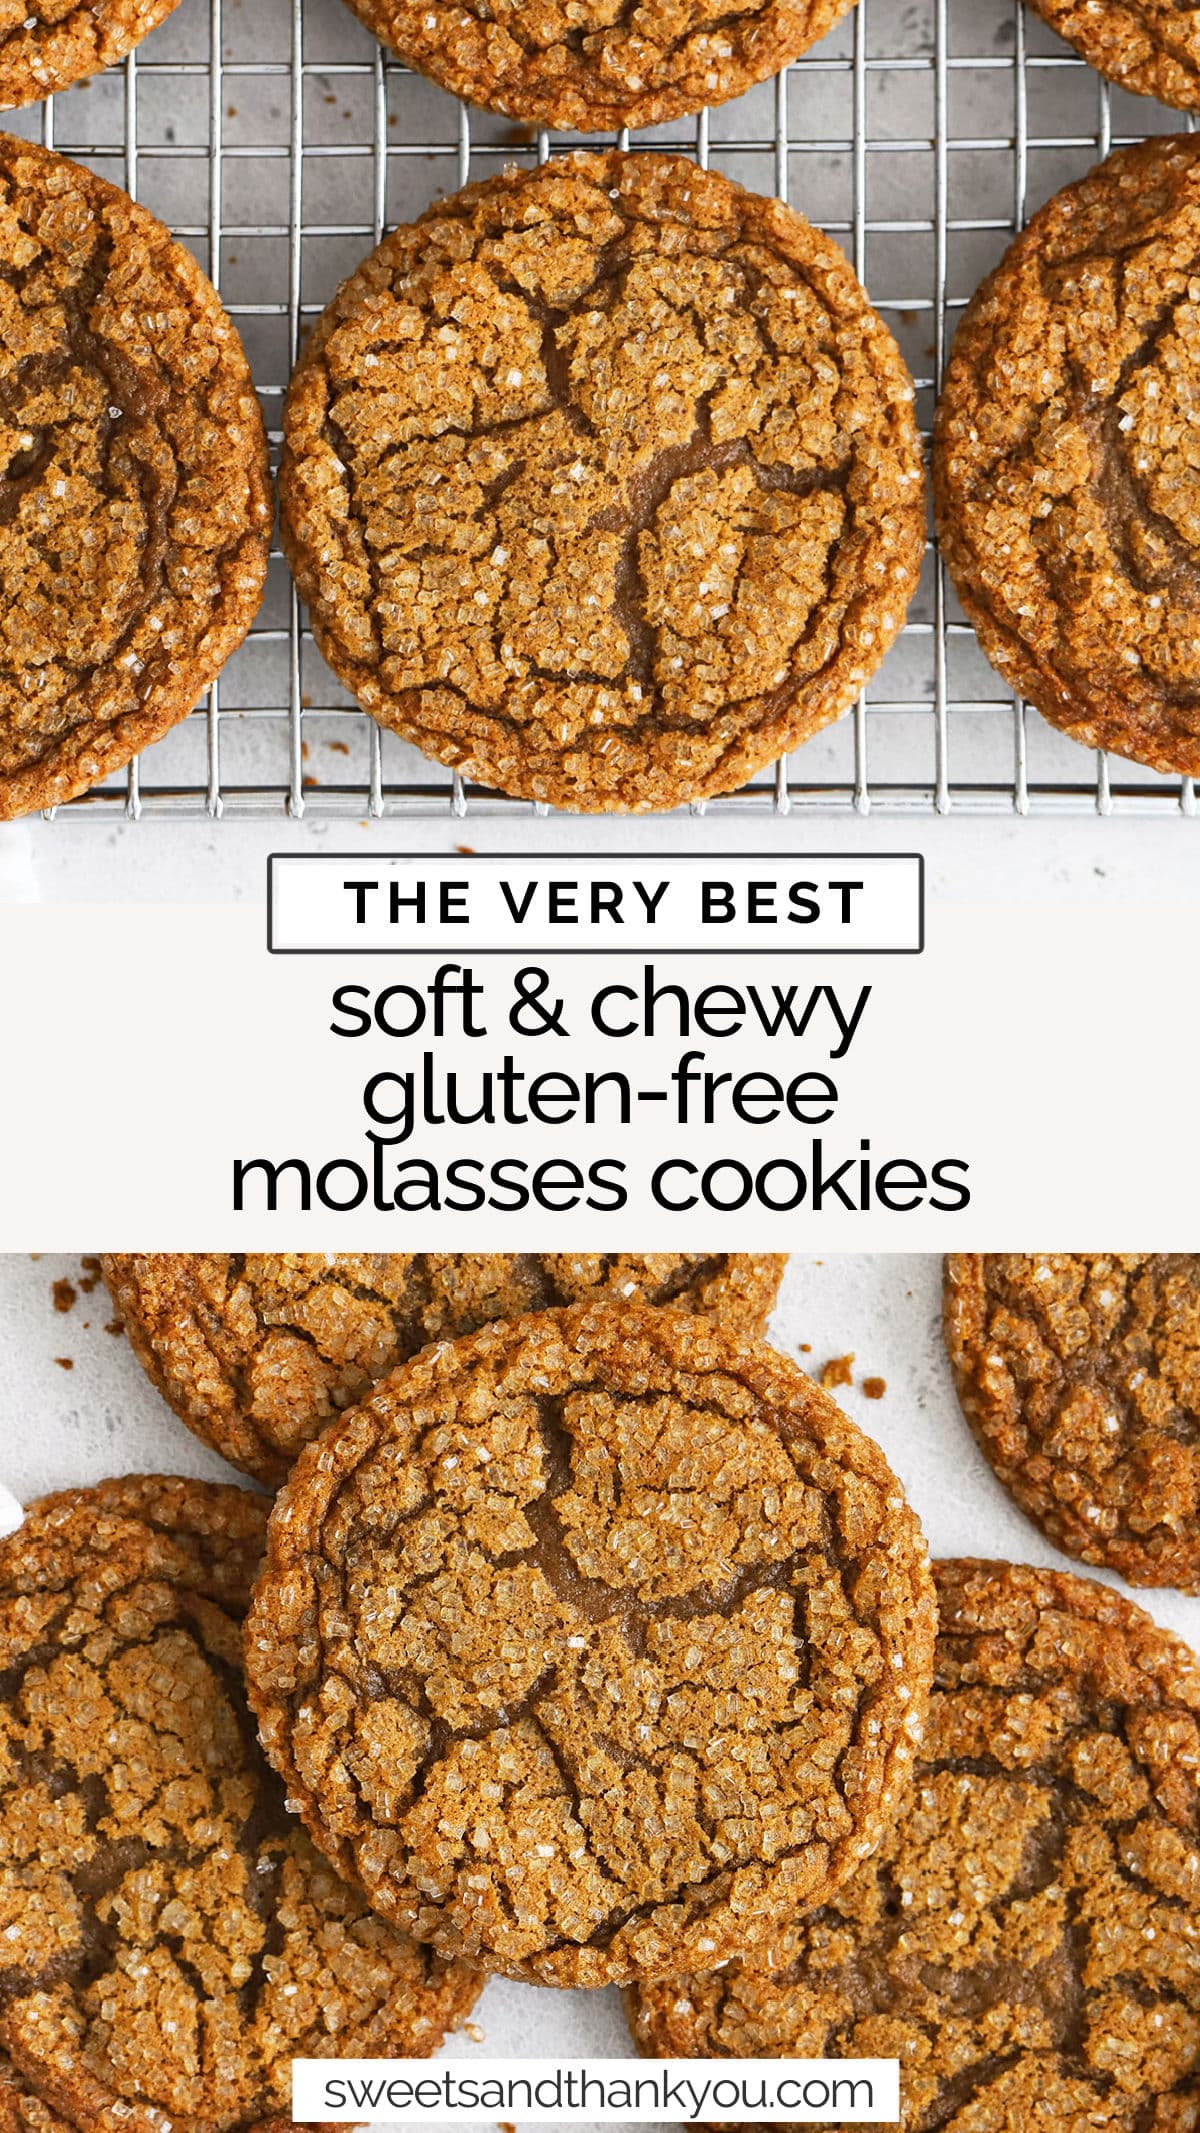 These soft, chewy gluten-free molasses cookies have warm spices and a satisfying crackle crunch on the outside you're going to LOVE. These gluten-free molasses crinkle cookies are perfect for the holidays or a gluten-free cookie exchange. You won't want to miss this holiday cookie recipe! 